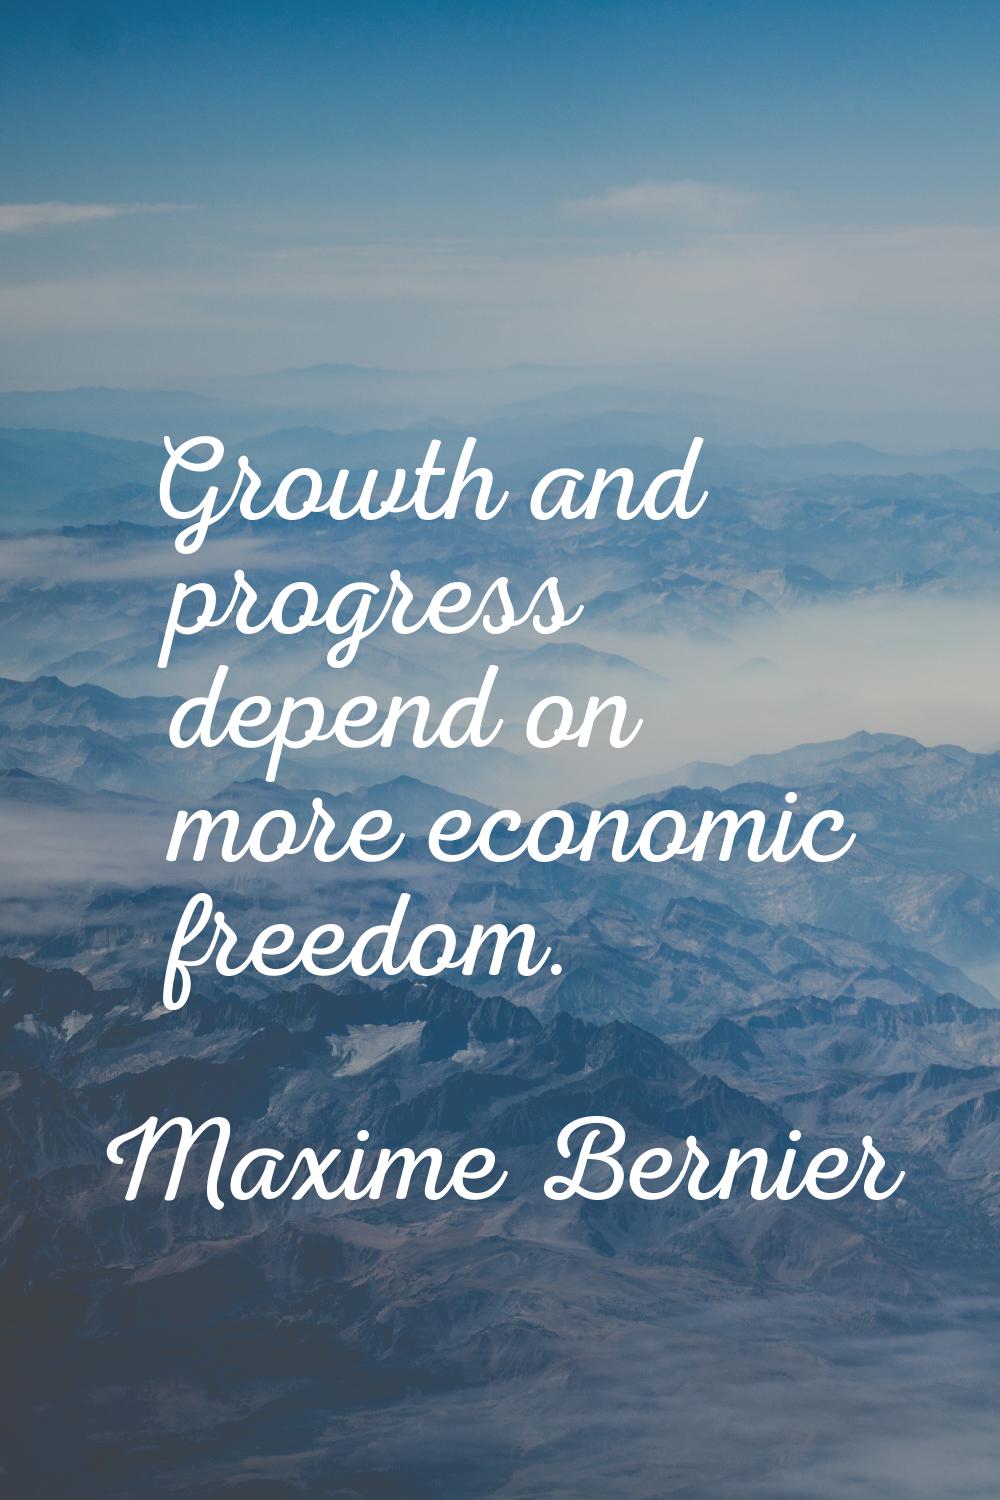 Growth and progress depend on more economic freedom.